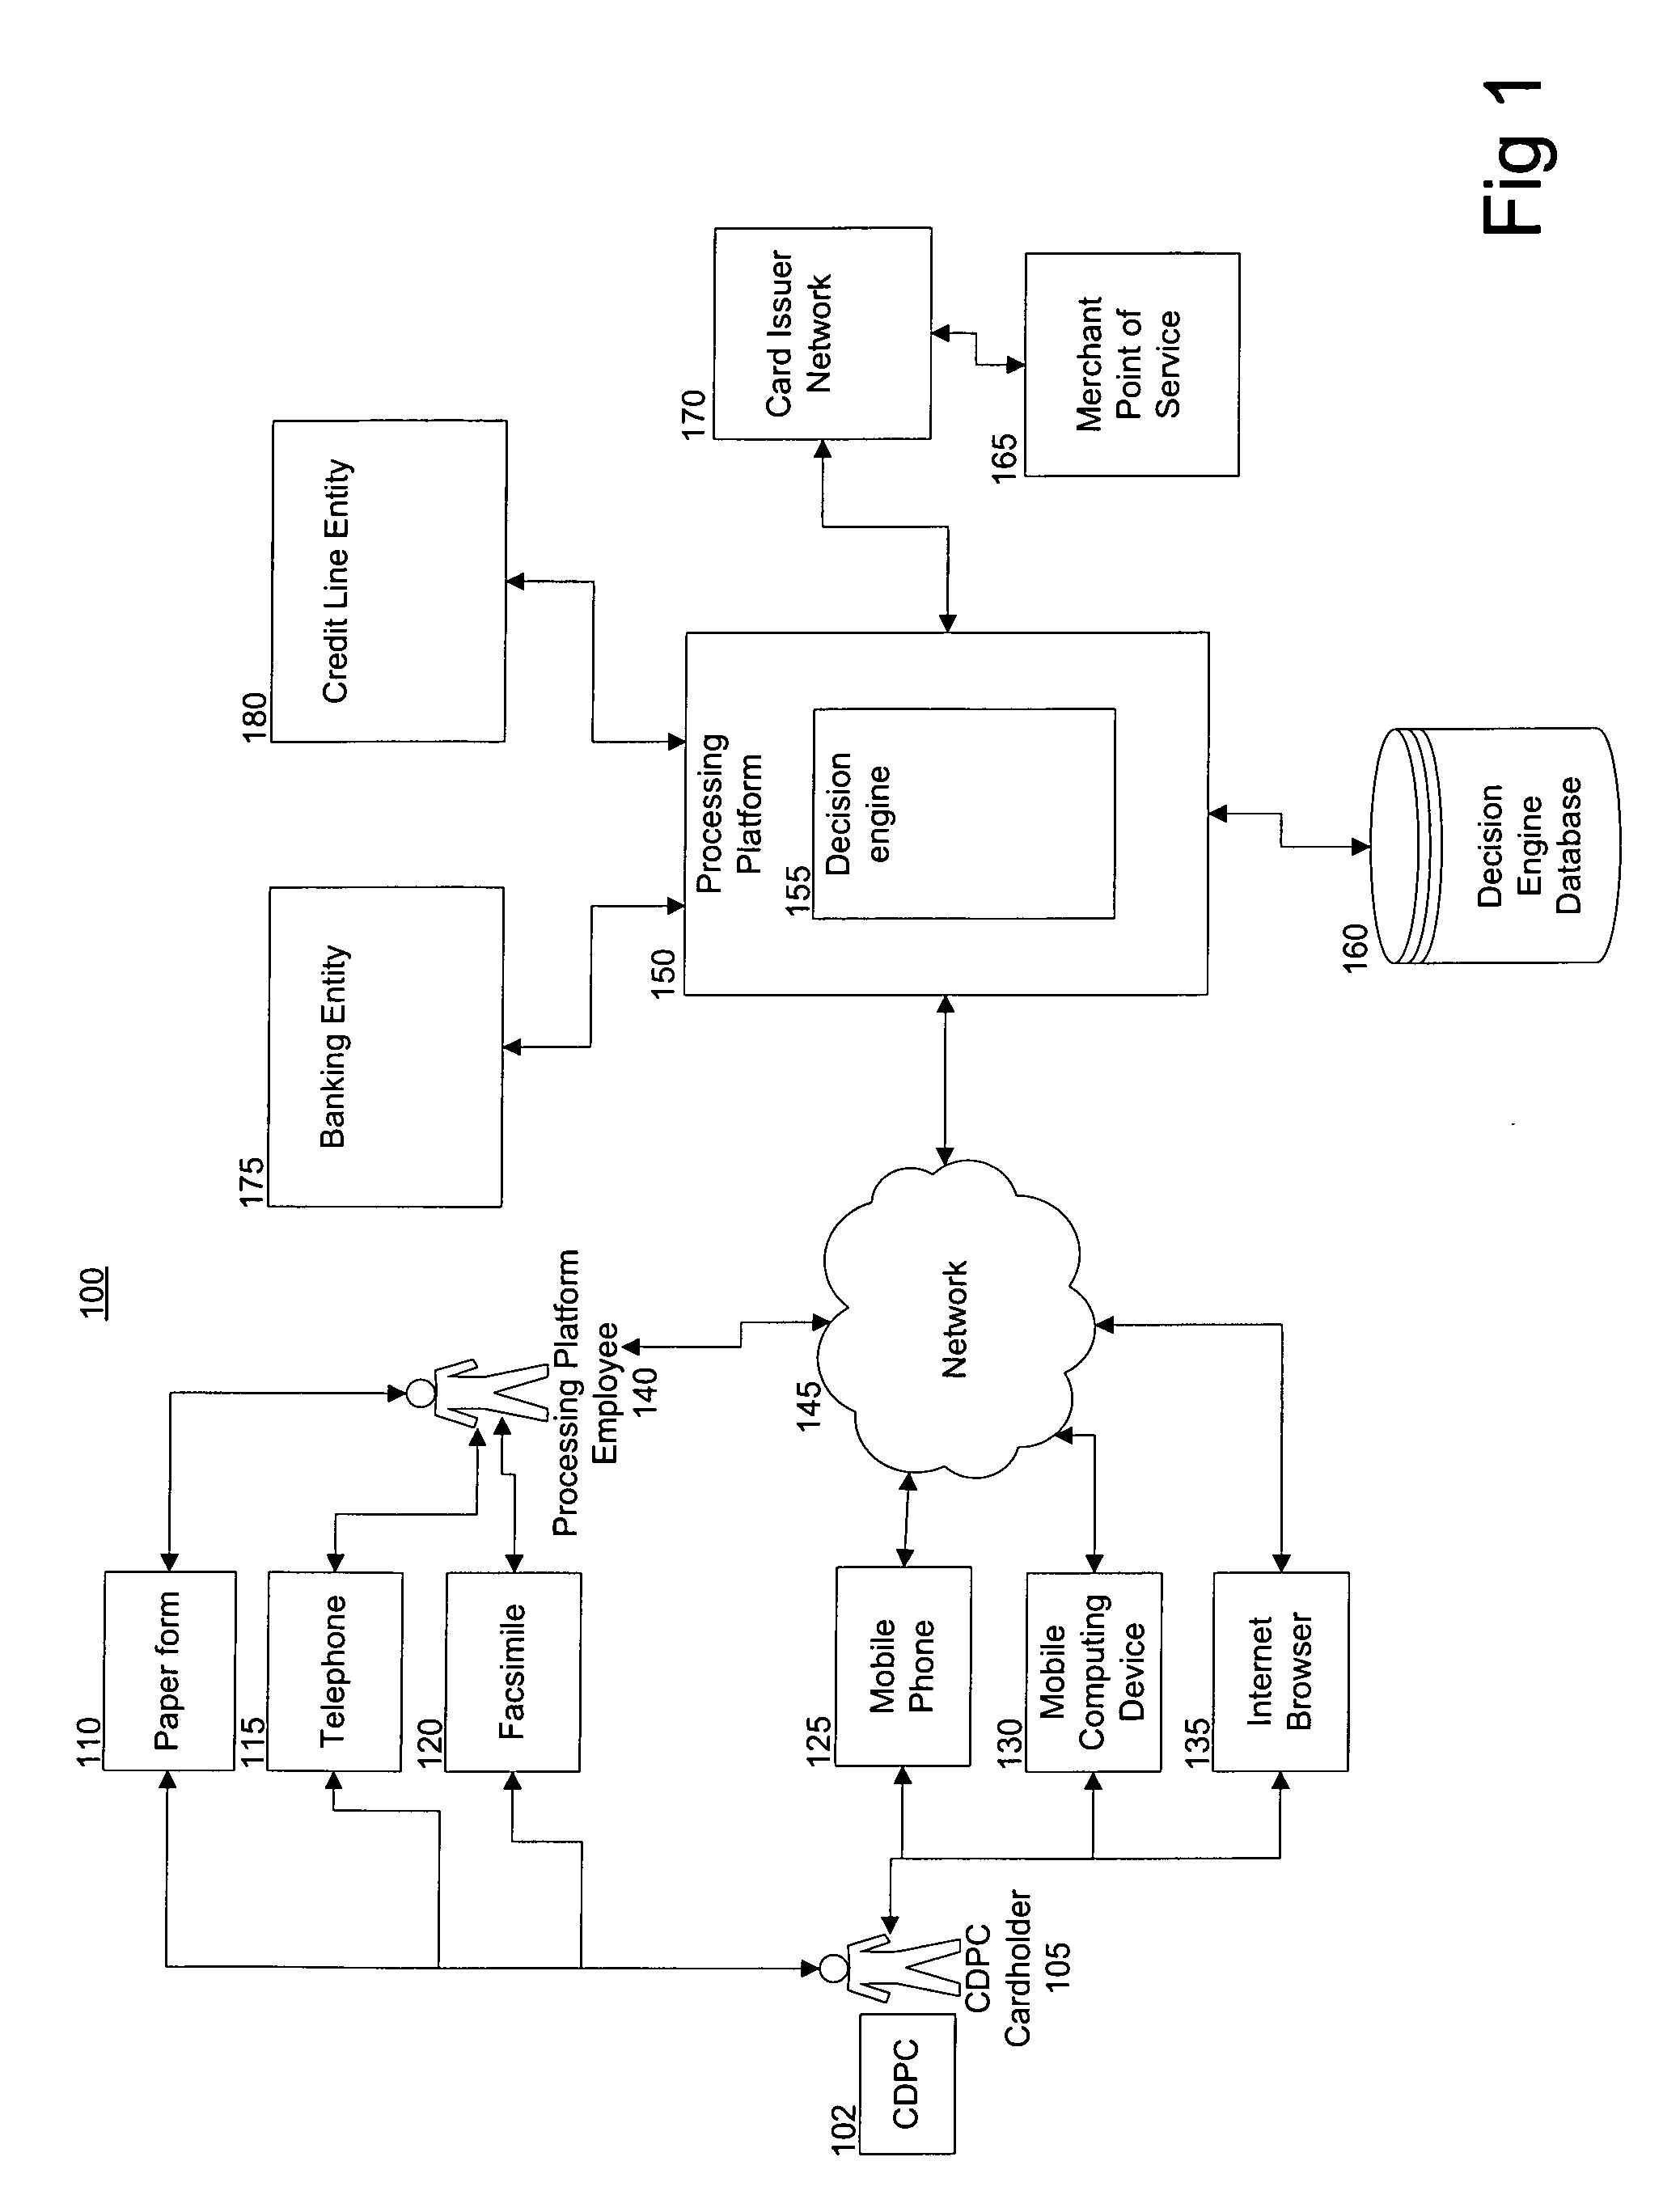 System and method for providing consumer directed payment card